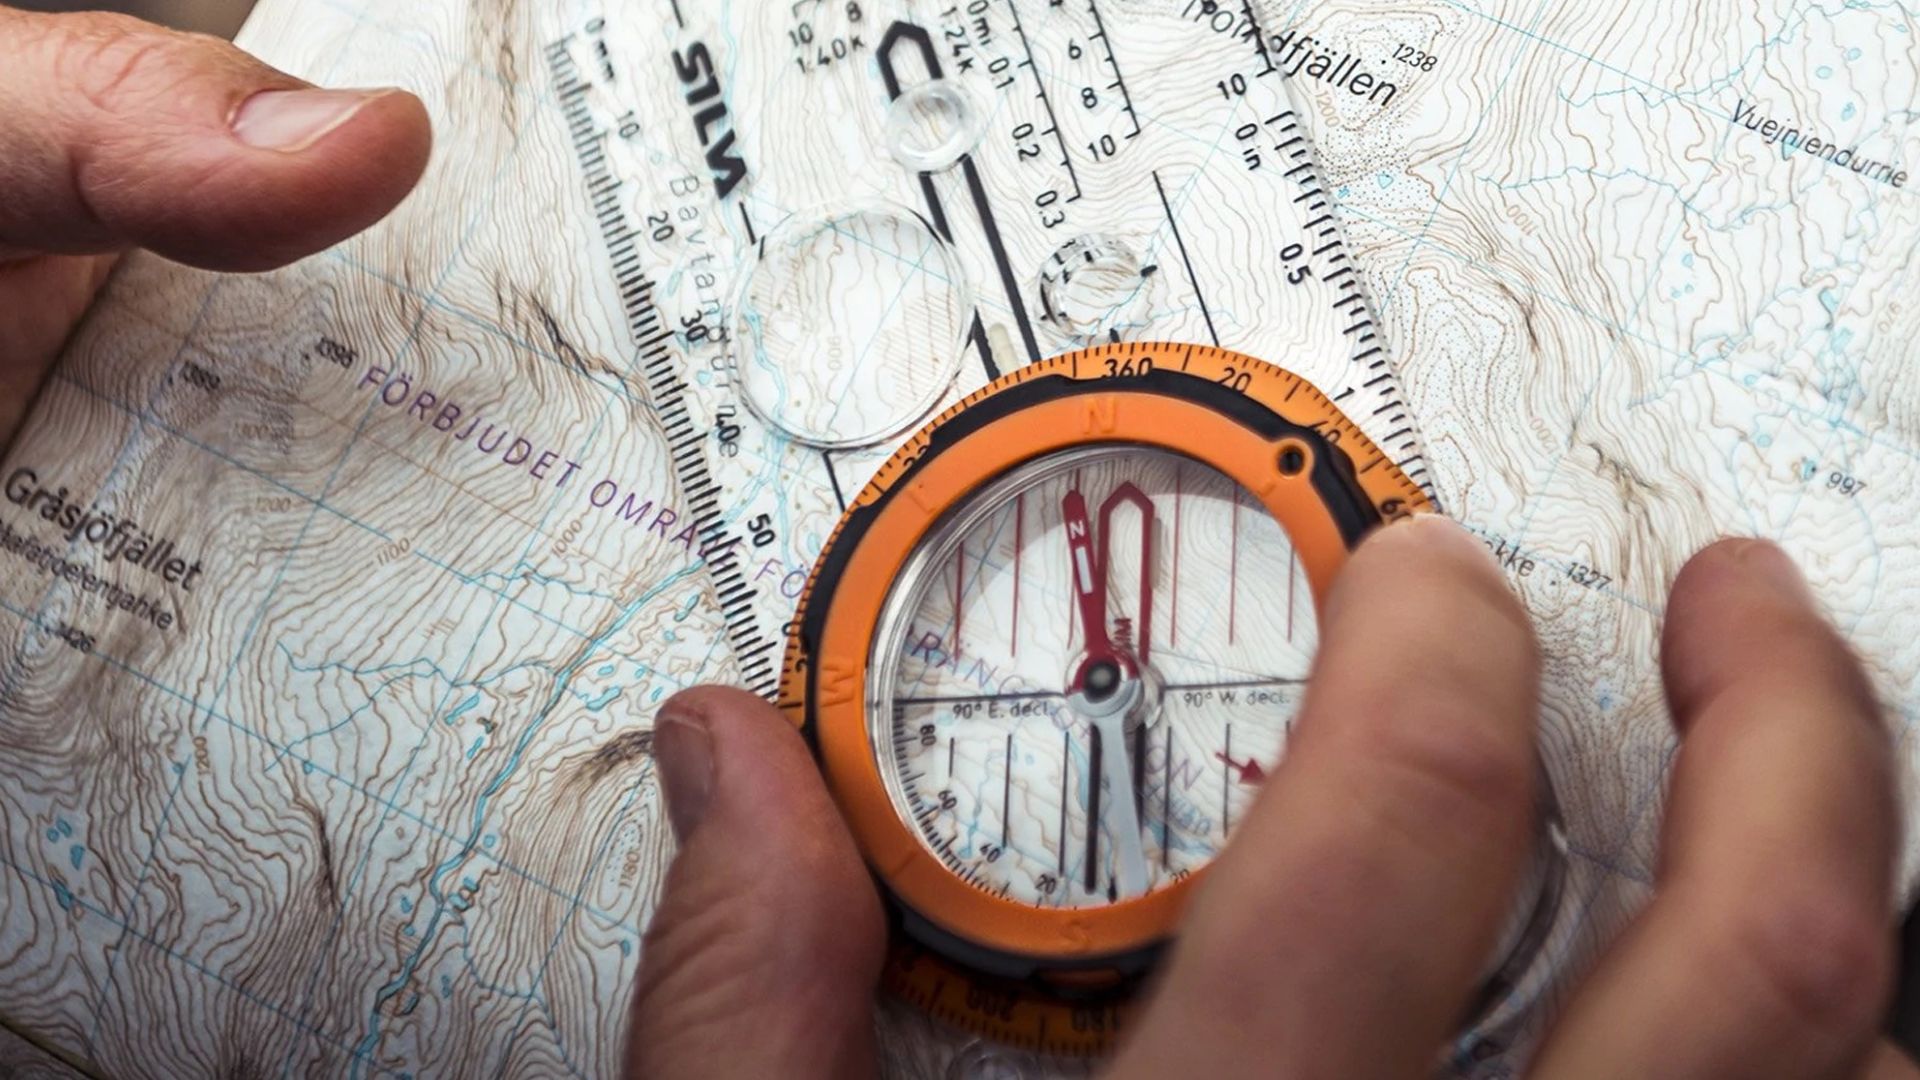 Using a Silva Expedition Compass on a topographical map